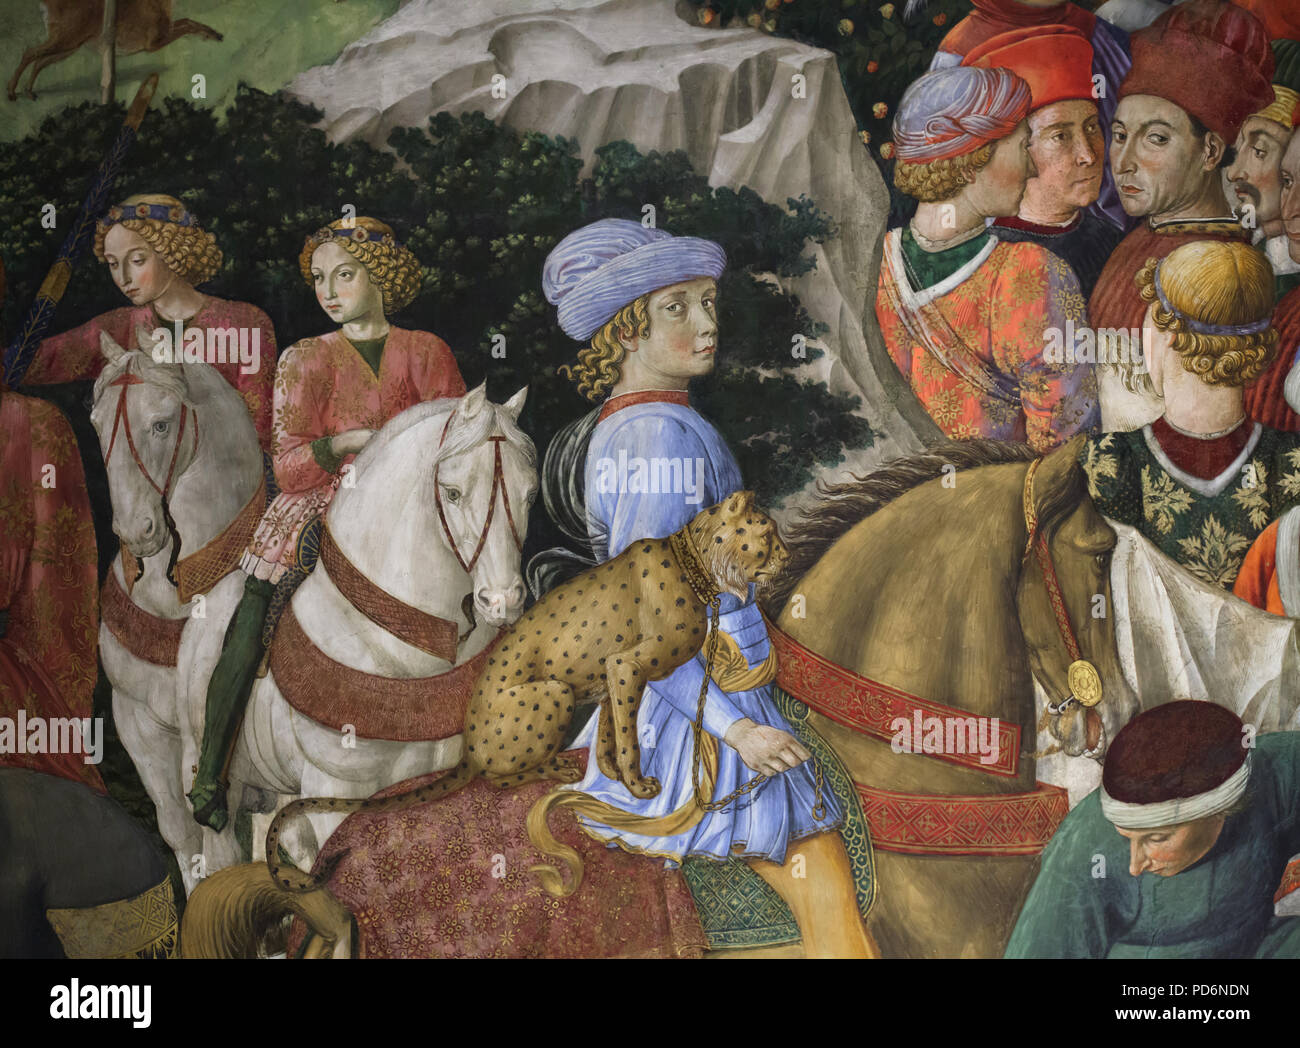 Giuliano de' Medici with a tame cheetah behind him on horseback depicted in the mural by Italian Renaissance painter Benozzo Gozzoli in the Magi Chapel in the Palazzo Medici Riccardi in Florence, Tuscany, Italy. Stock Photo